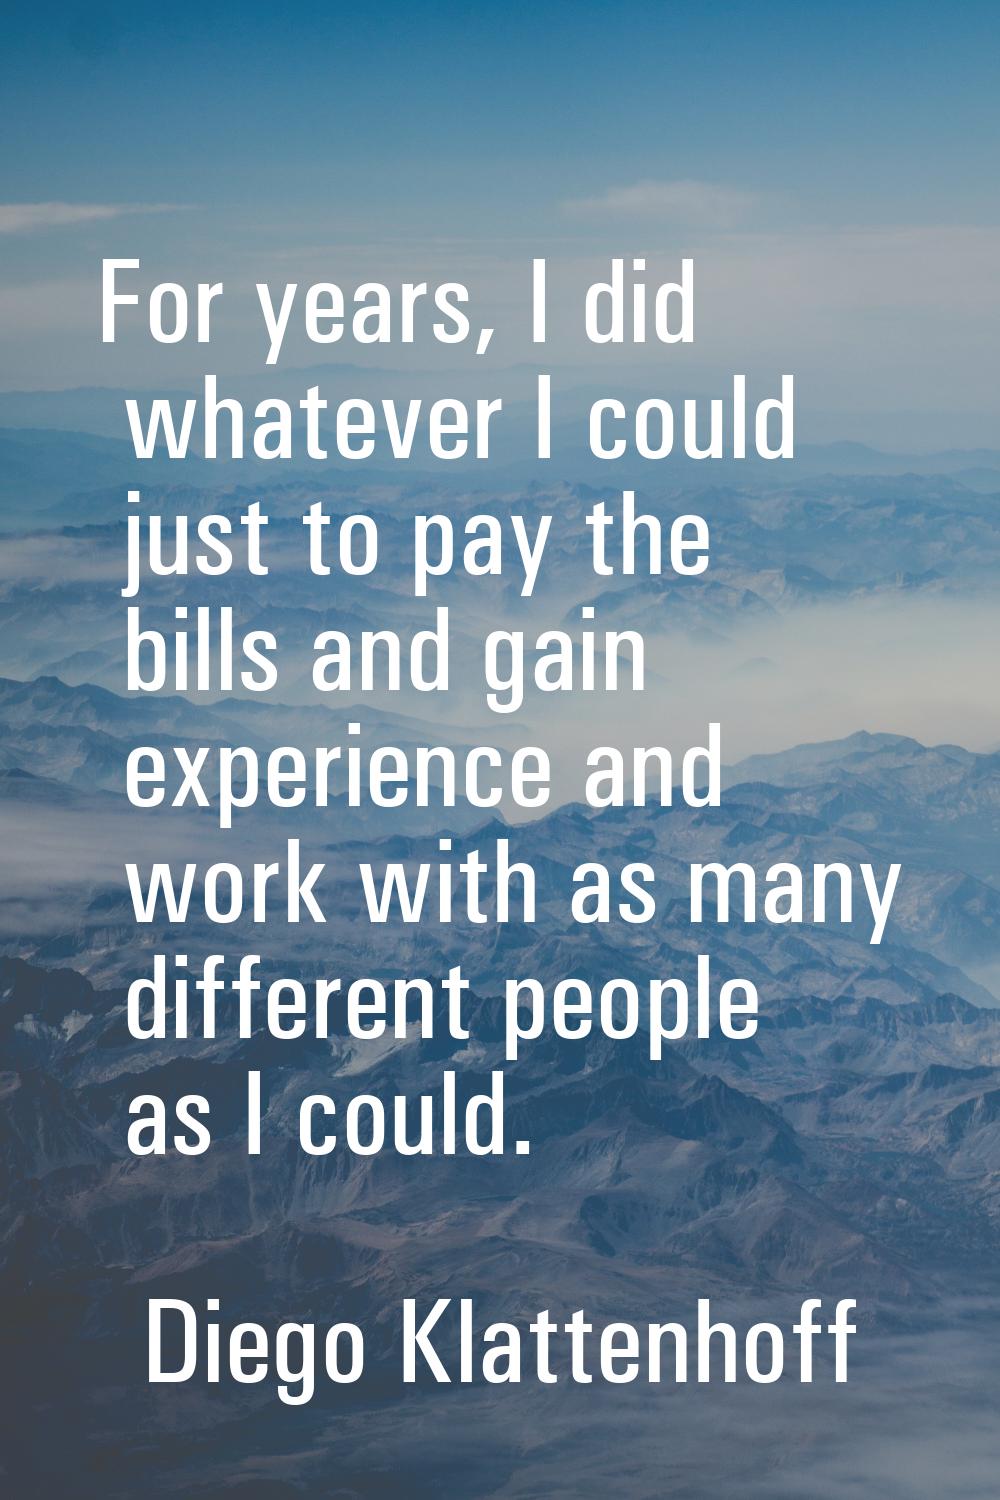 For years, I did whatever I could just to pay the bills and gain experience and work with as many d